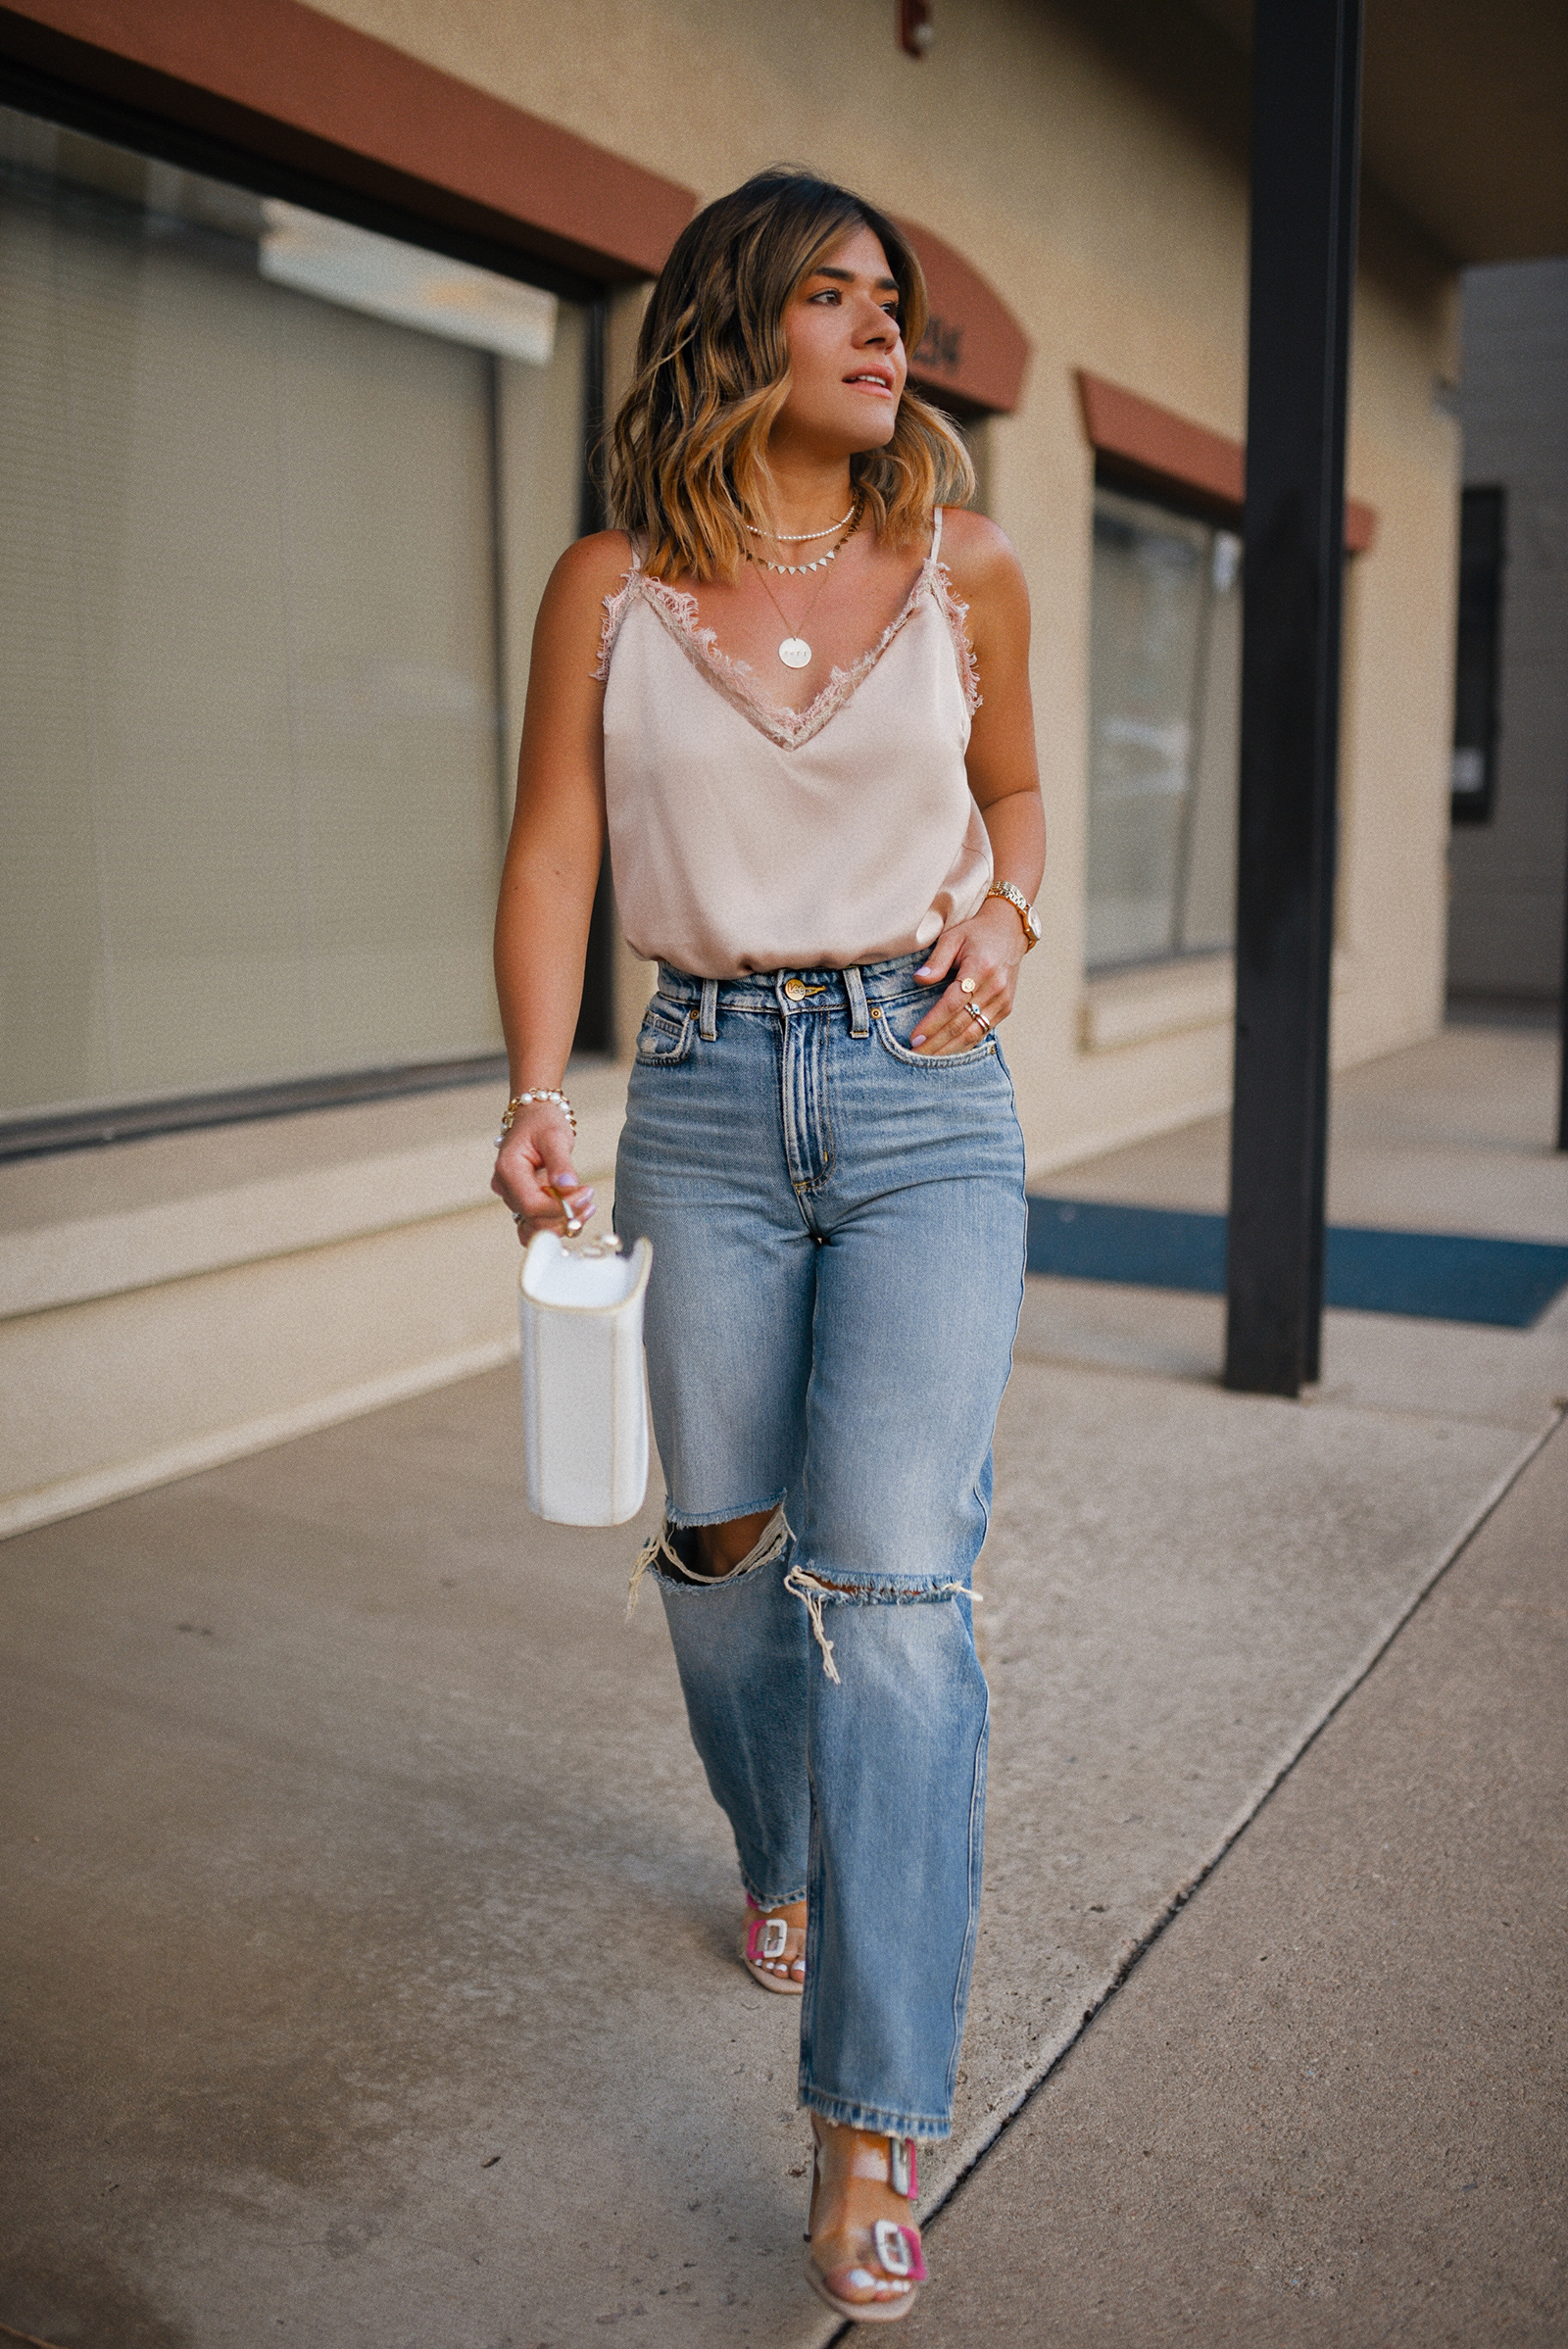 CAROLINA HELLAL FROM CHIC TALK WEARING A PINK CAMISOLE AND STRAIGHT RIPPED JEANS